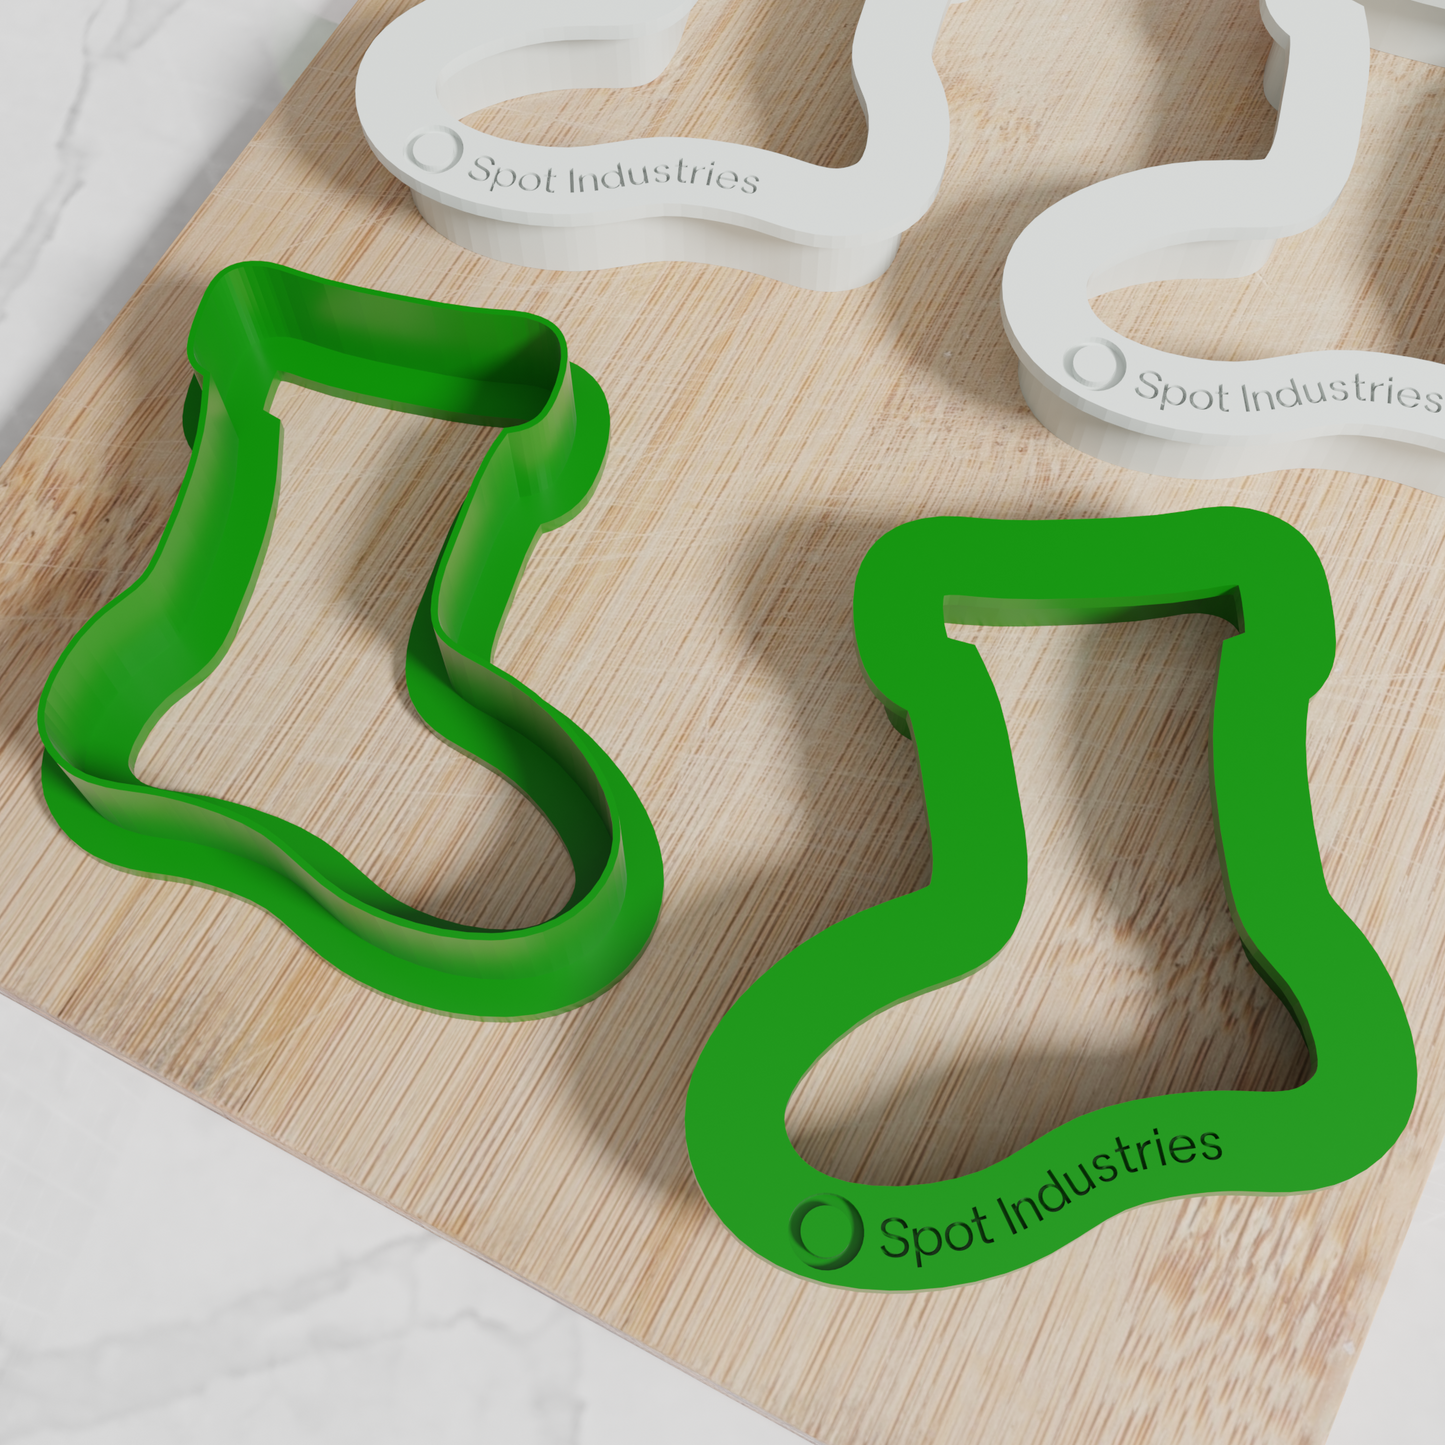 Easy Grip Stocking Cookie Cutter Set For Kids & Adults! Custom Sizes, Multiple Colors. Work As Clay Cutter And Fondant Cutter Too!